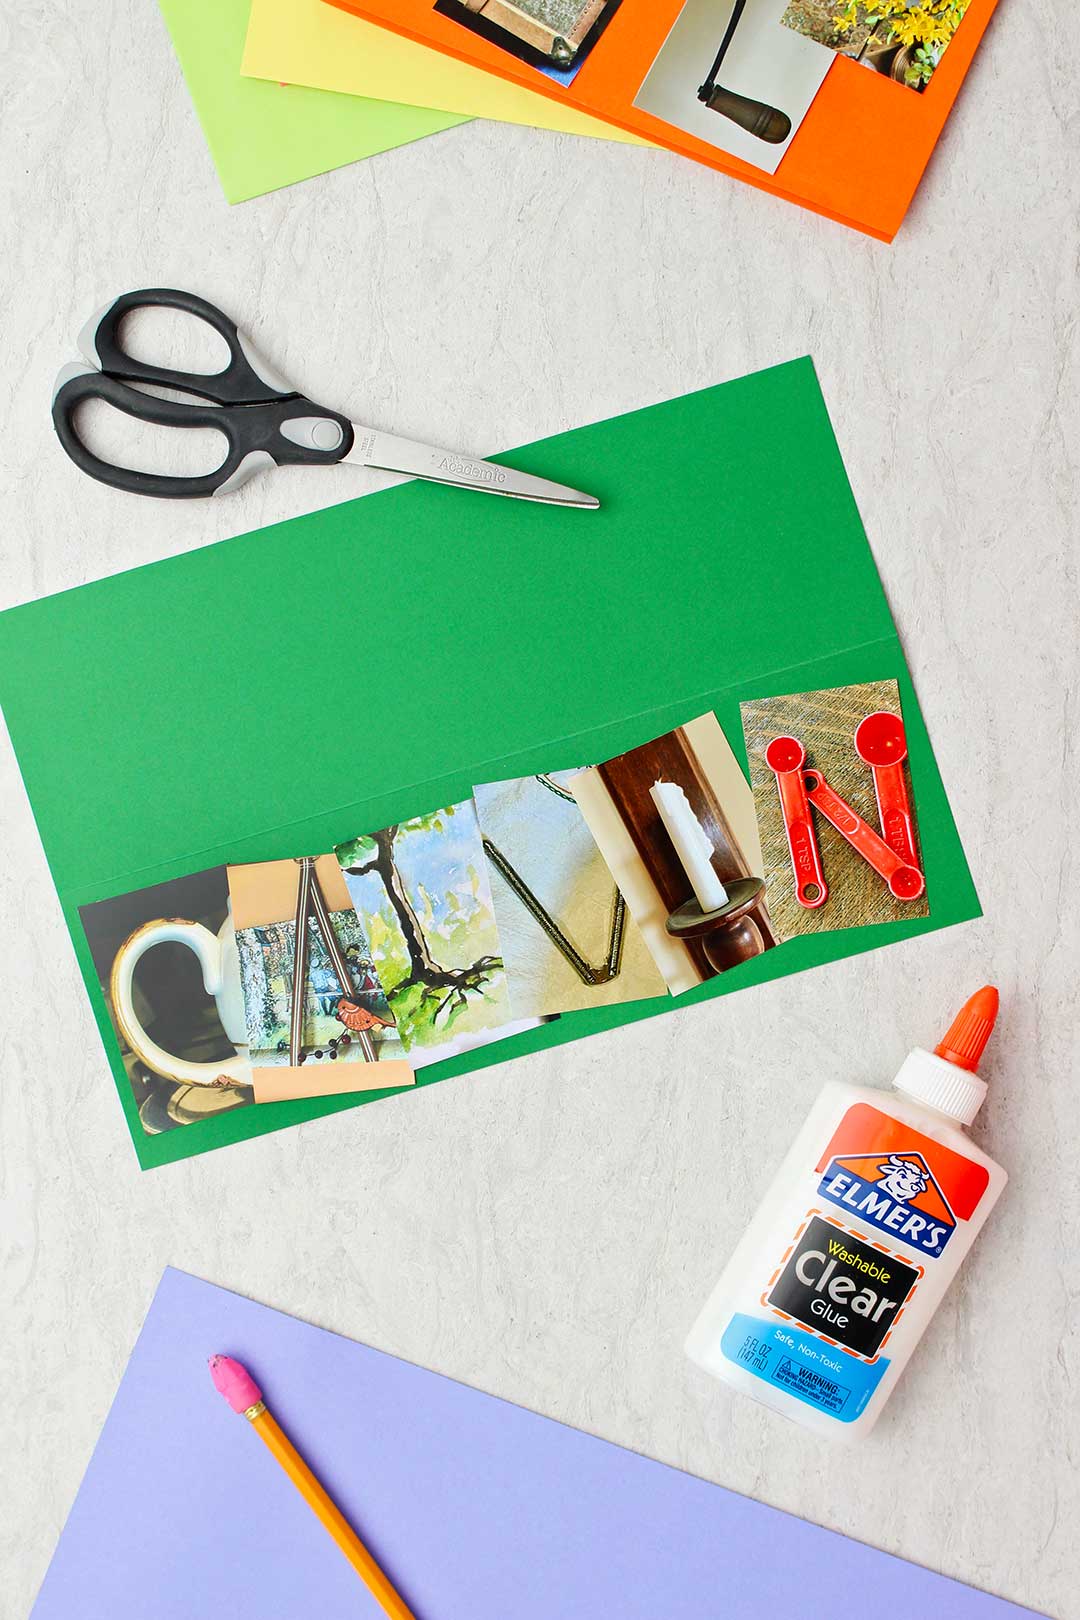 Card on green paper spelling "Calvin" with printed photo letters with colorful paper, scissors and white glue near by.